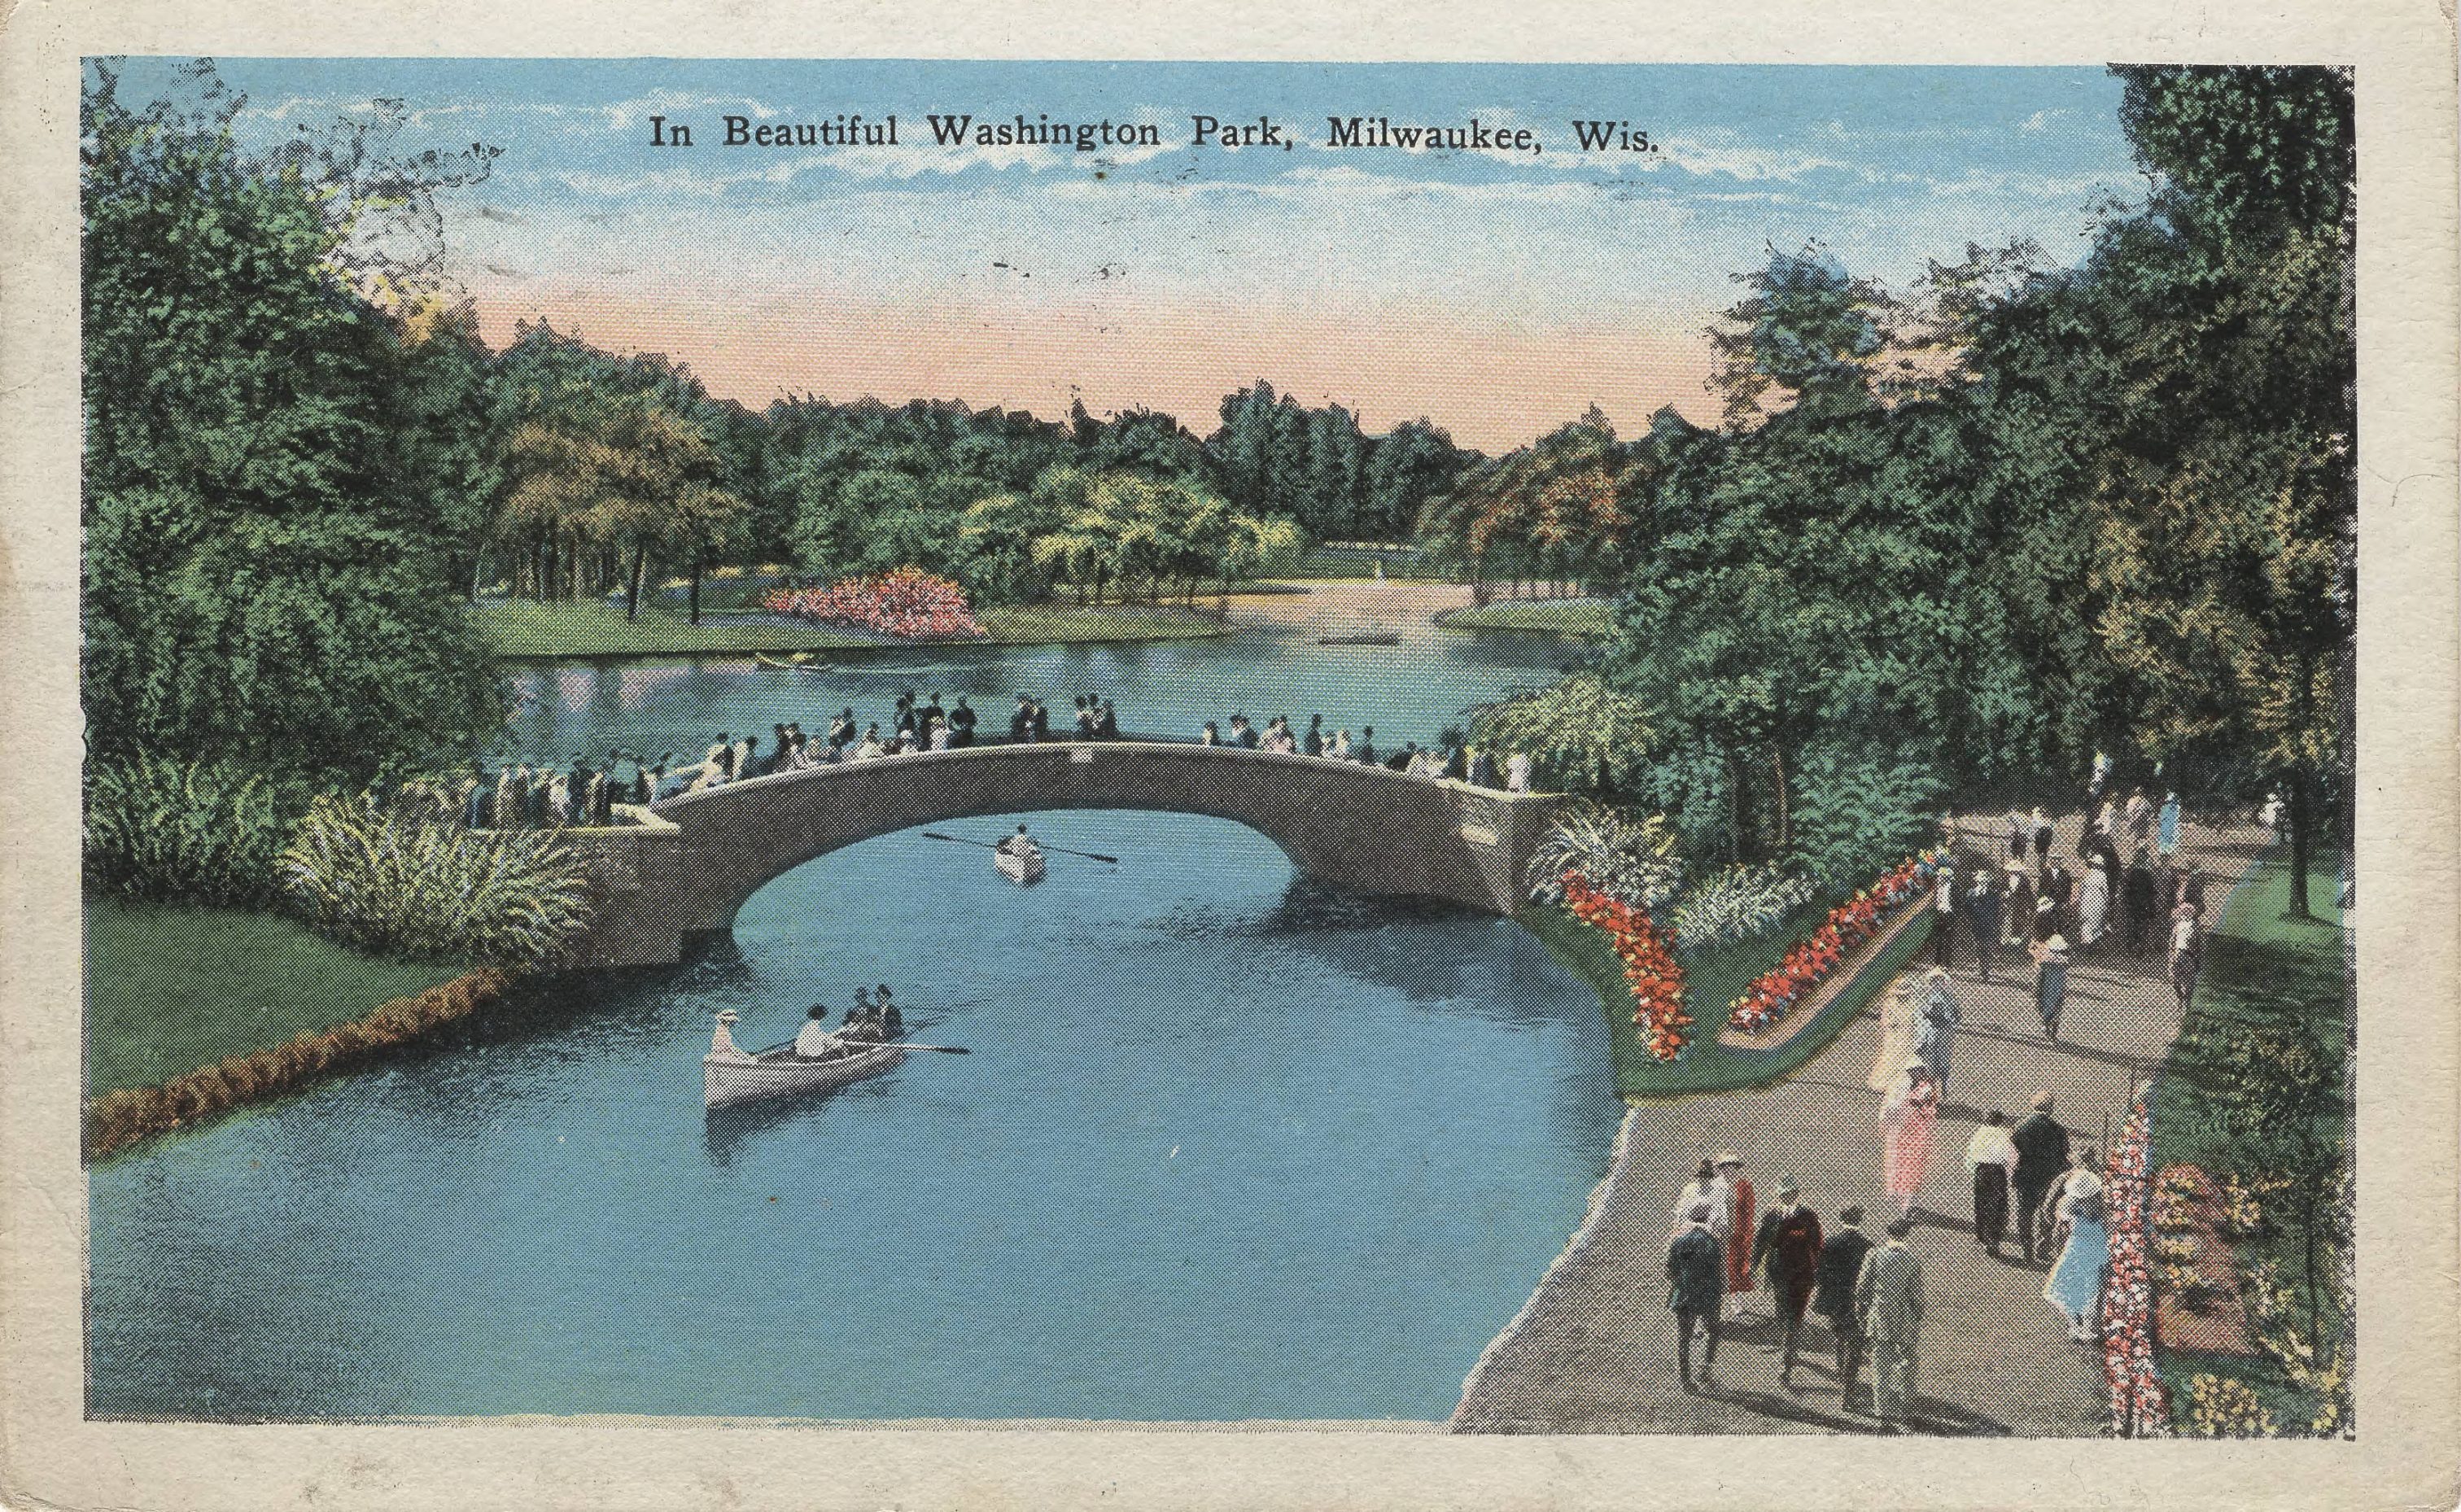 This 1929 post card illustrates groups of people enjoying the gardens and artificial lake of Washington Park.